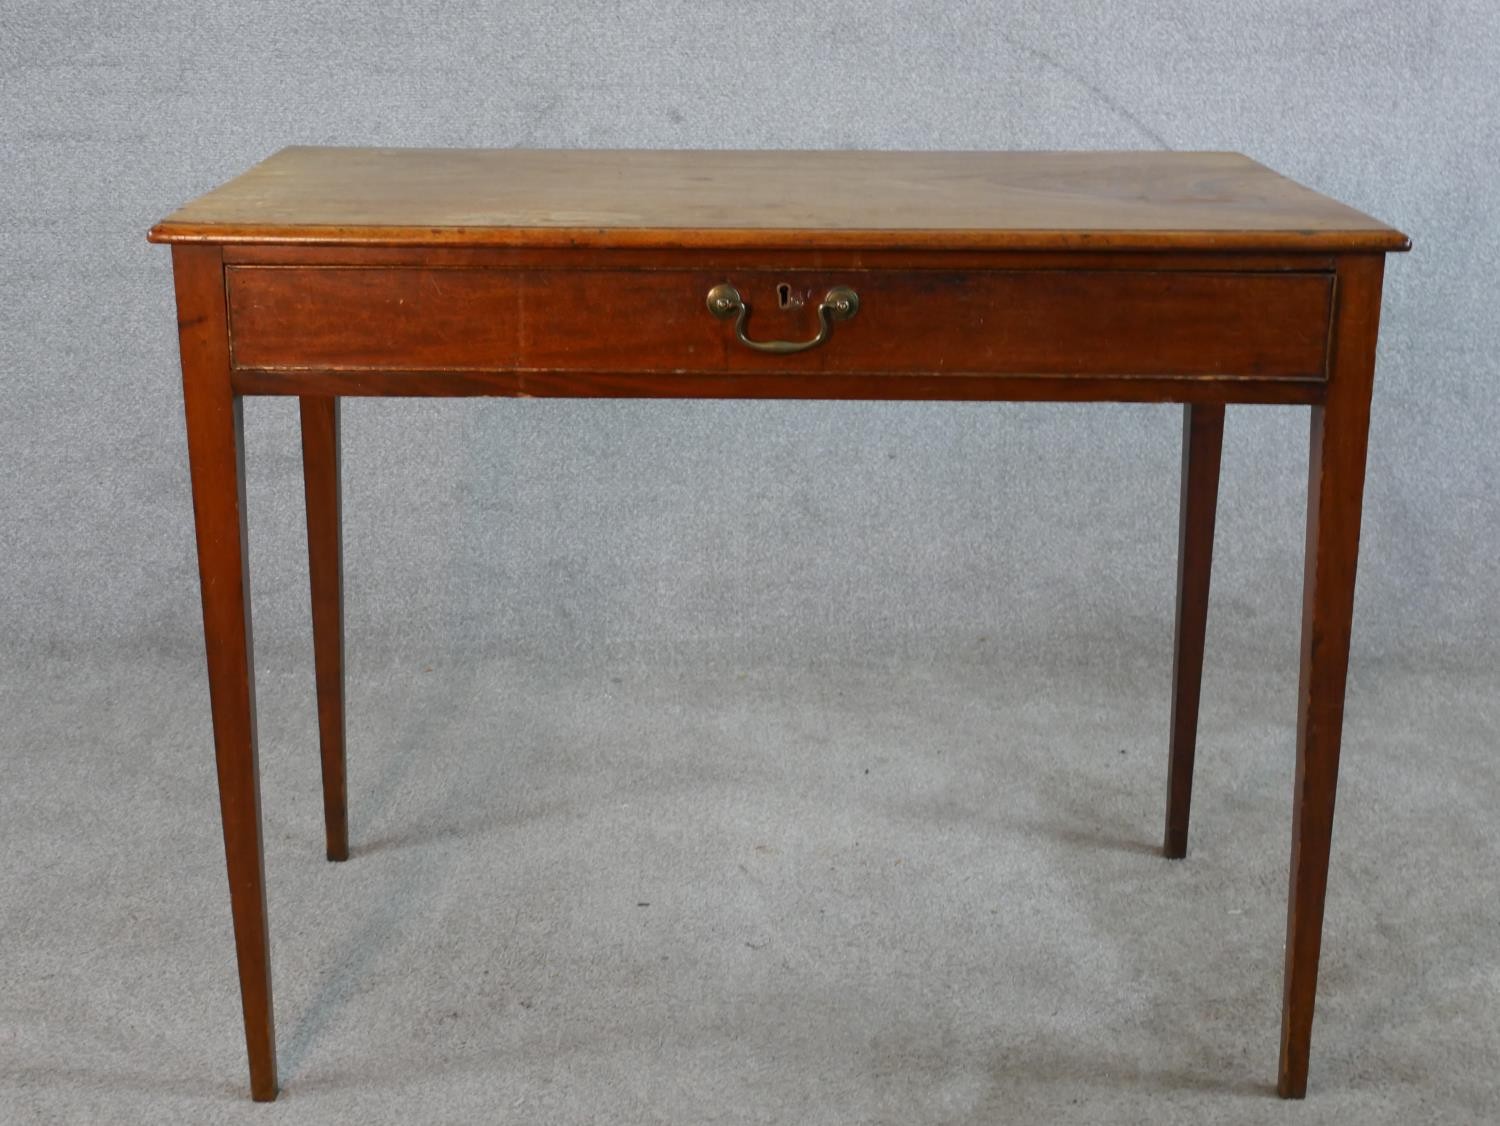 A 19th century mahogany single drawer side table with brass swing handle, raised on square